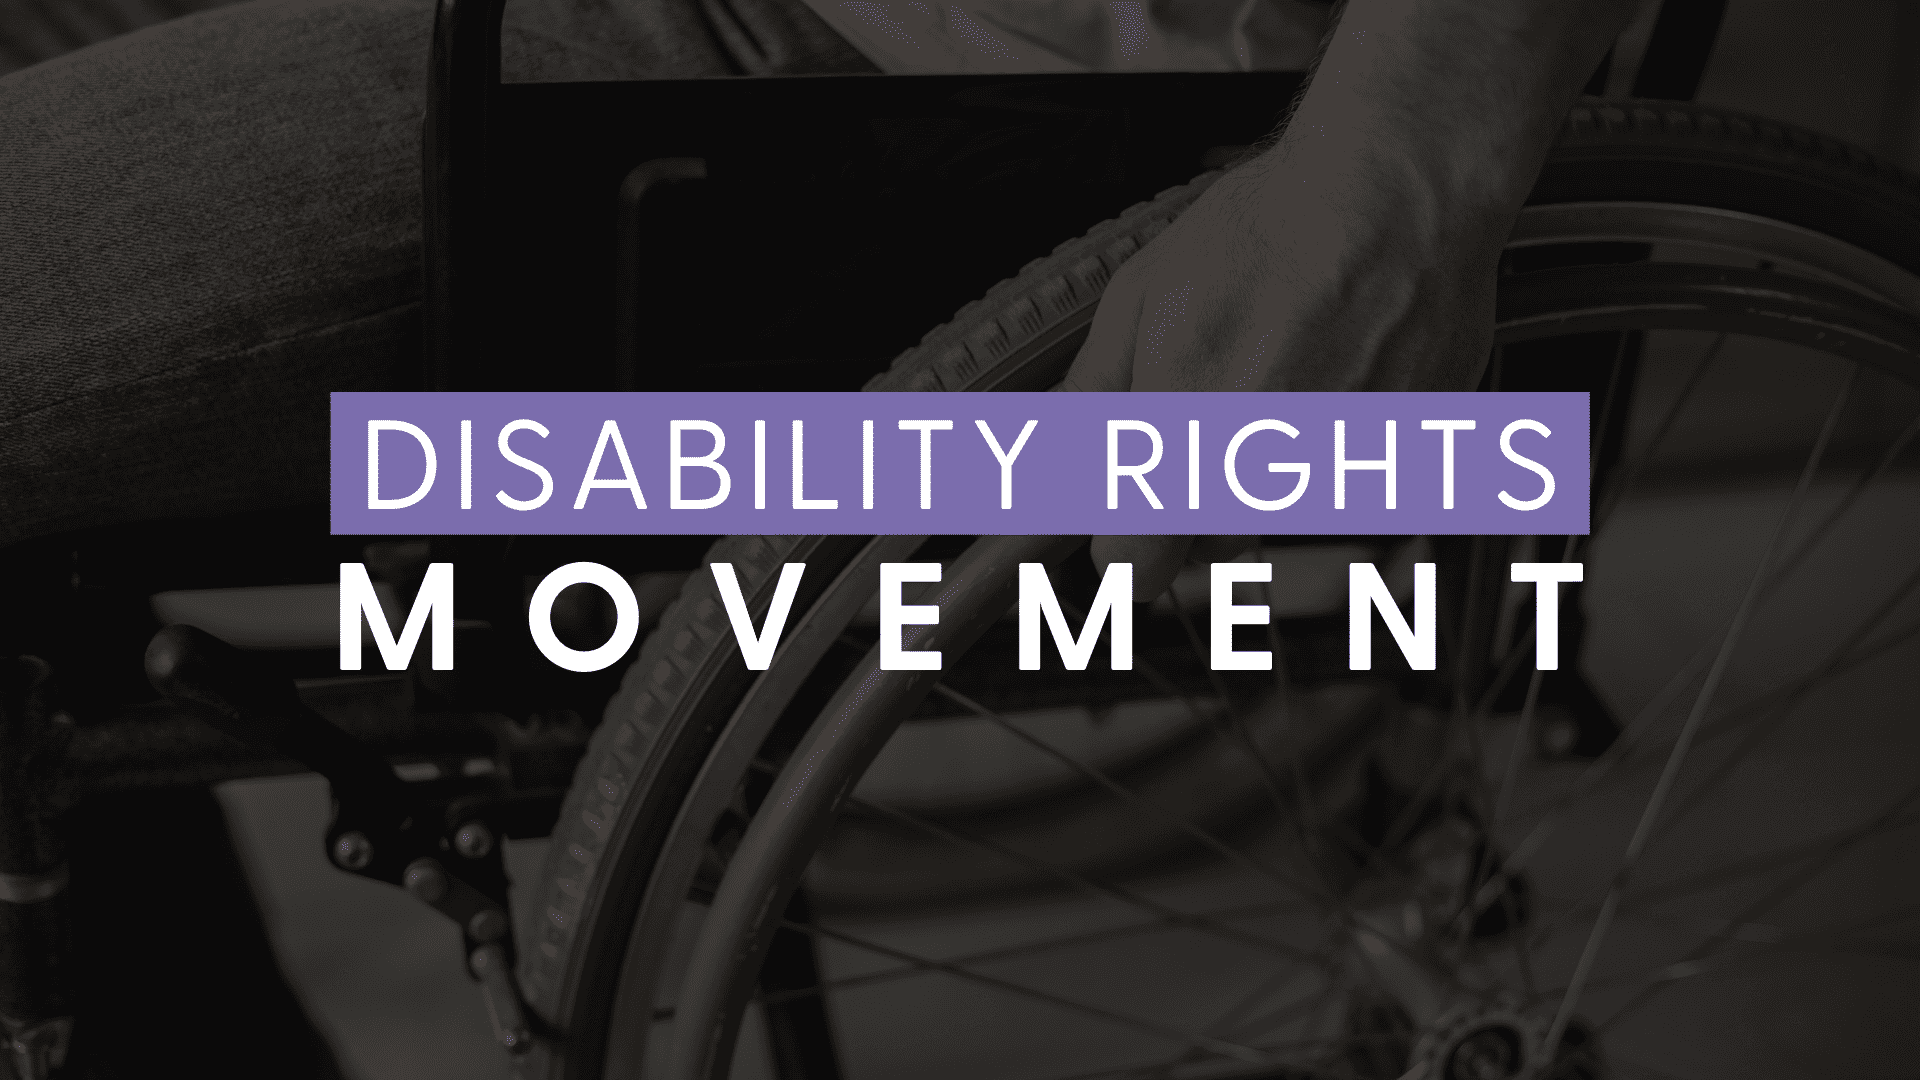 What is the disability rights movement?